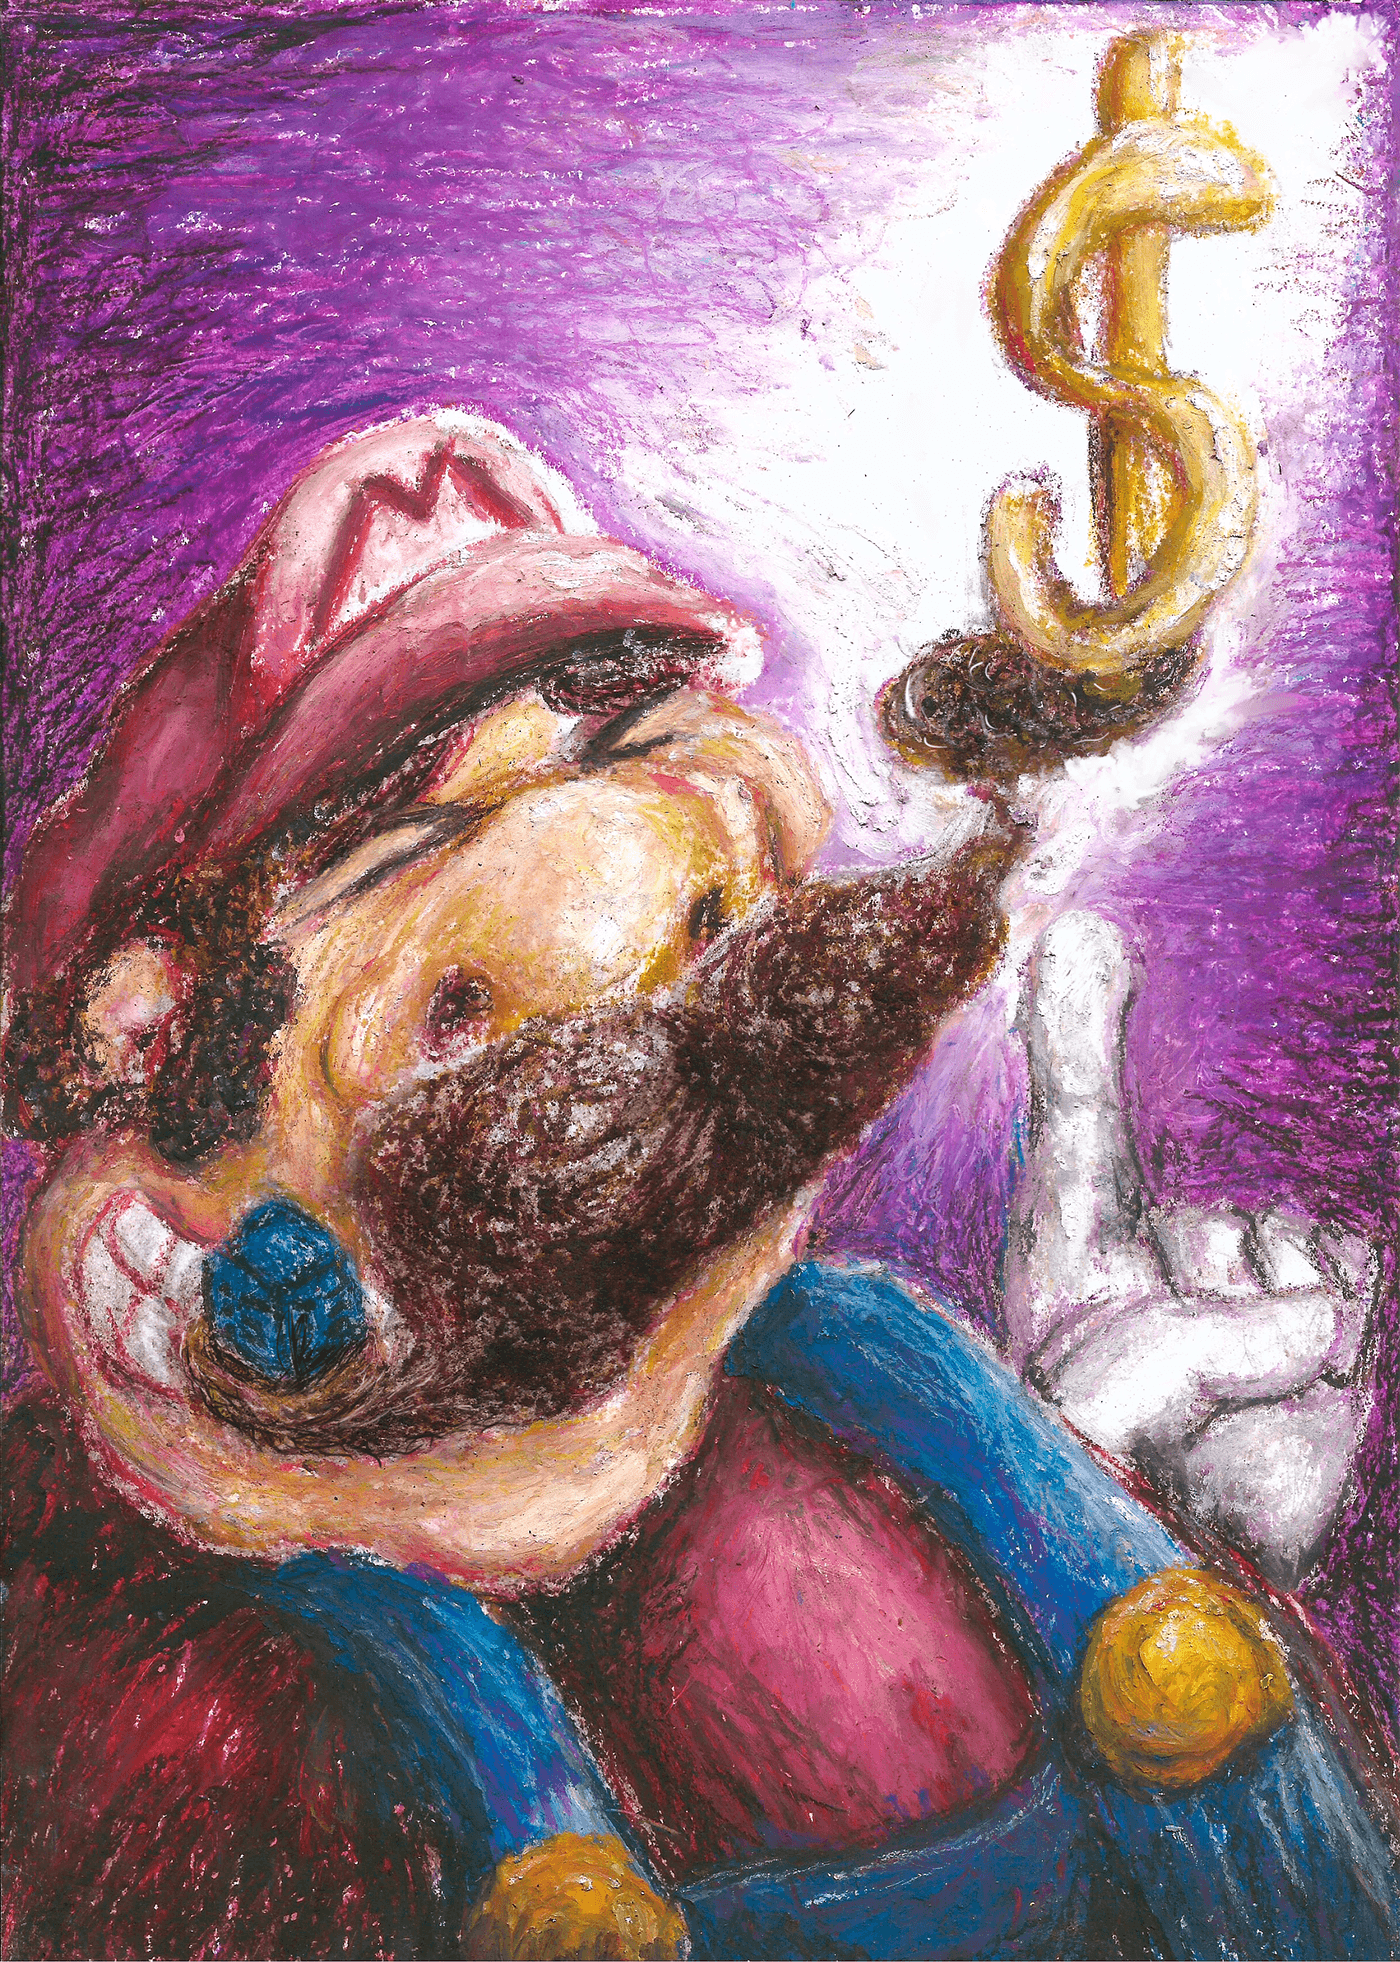 Editorial business magazine cover illustration - oil pastels - the game industry and nintendo predic